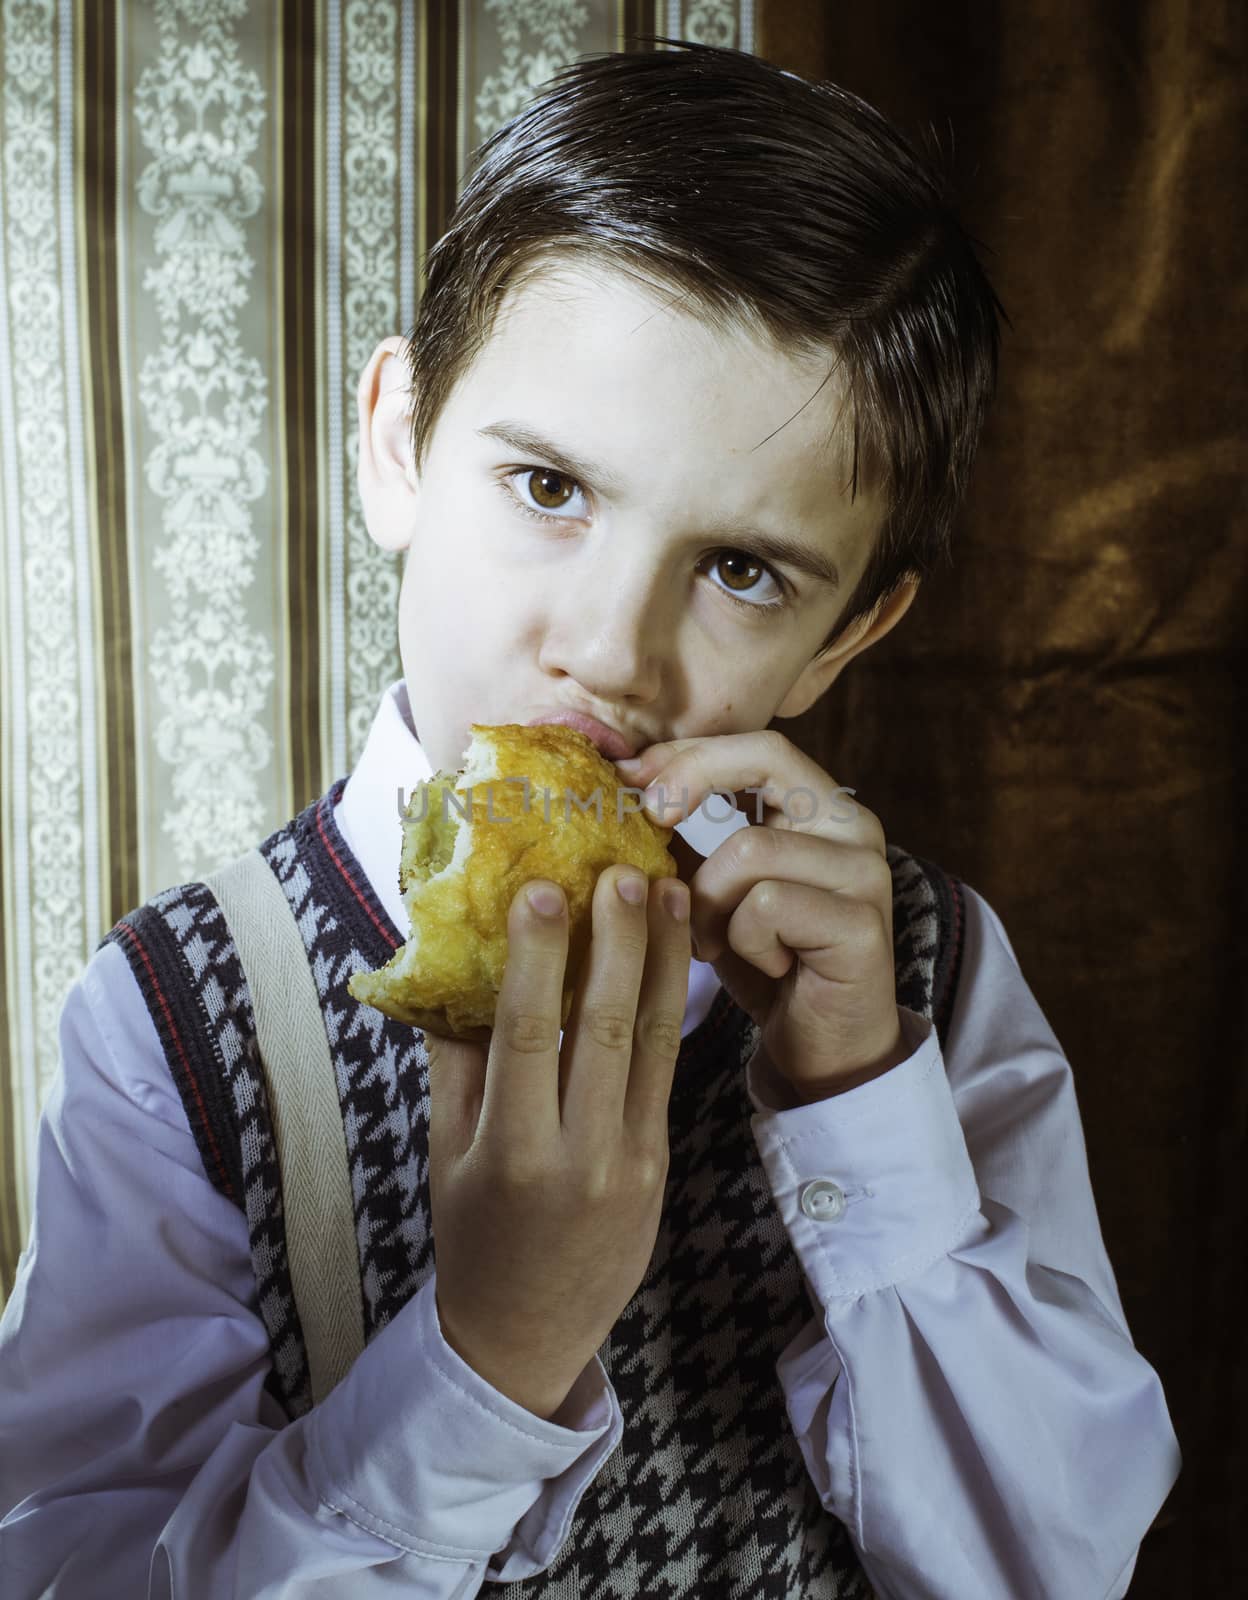 Child who eat donut. Vintage clothes and background